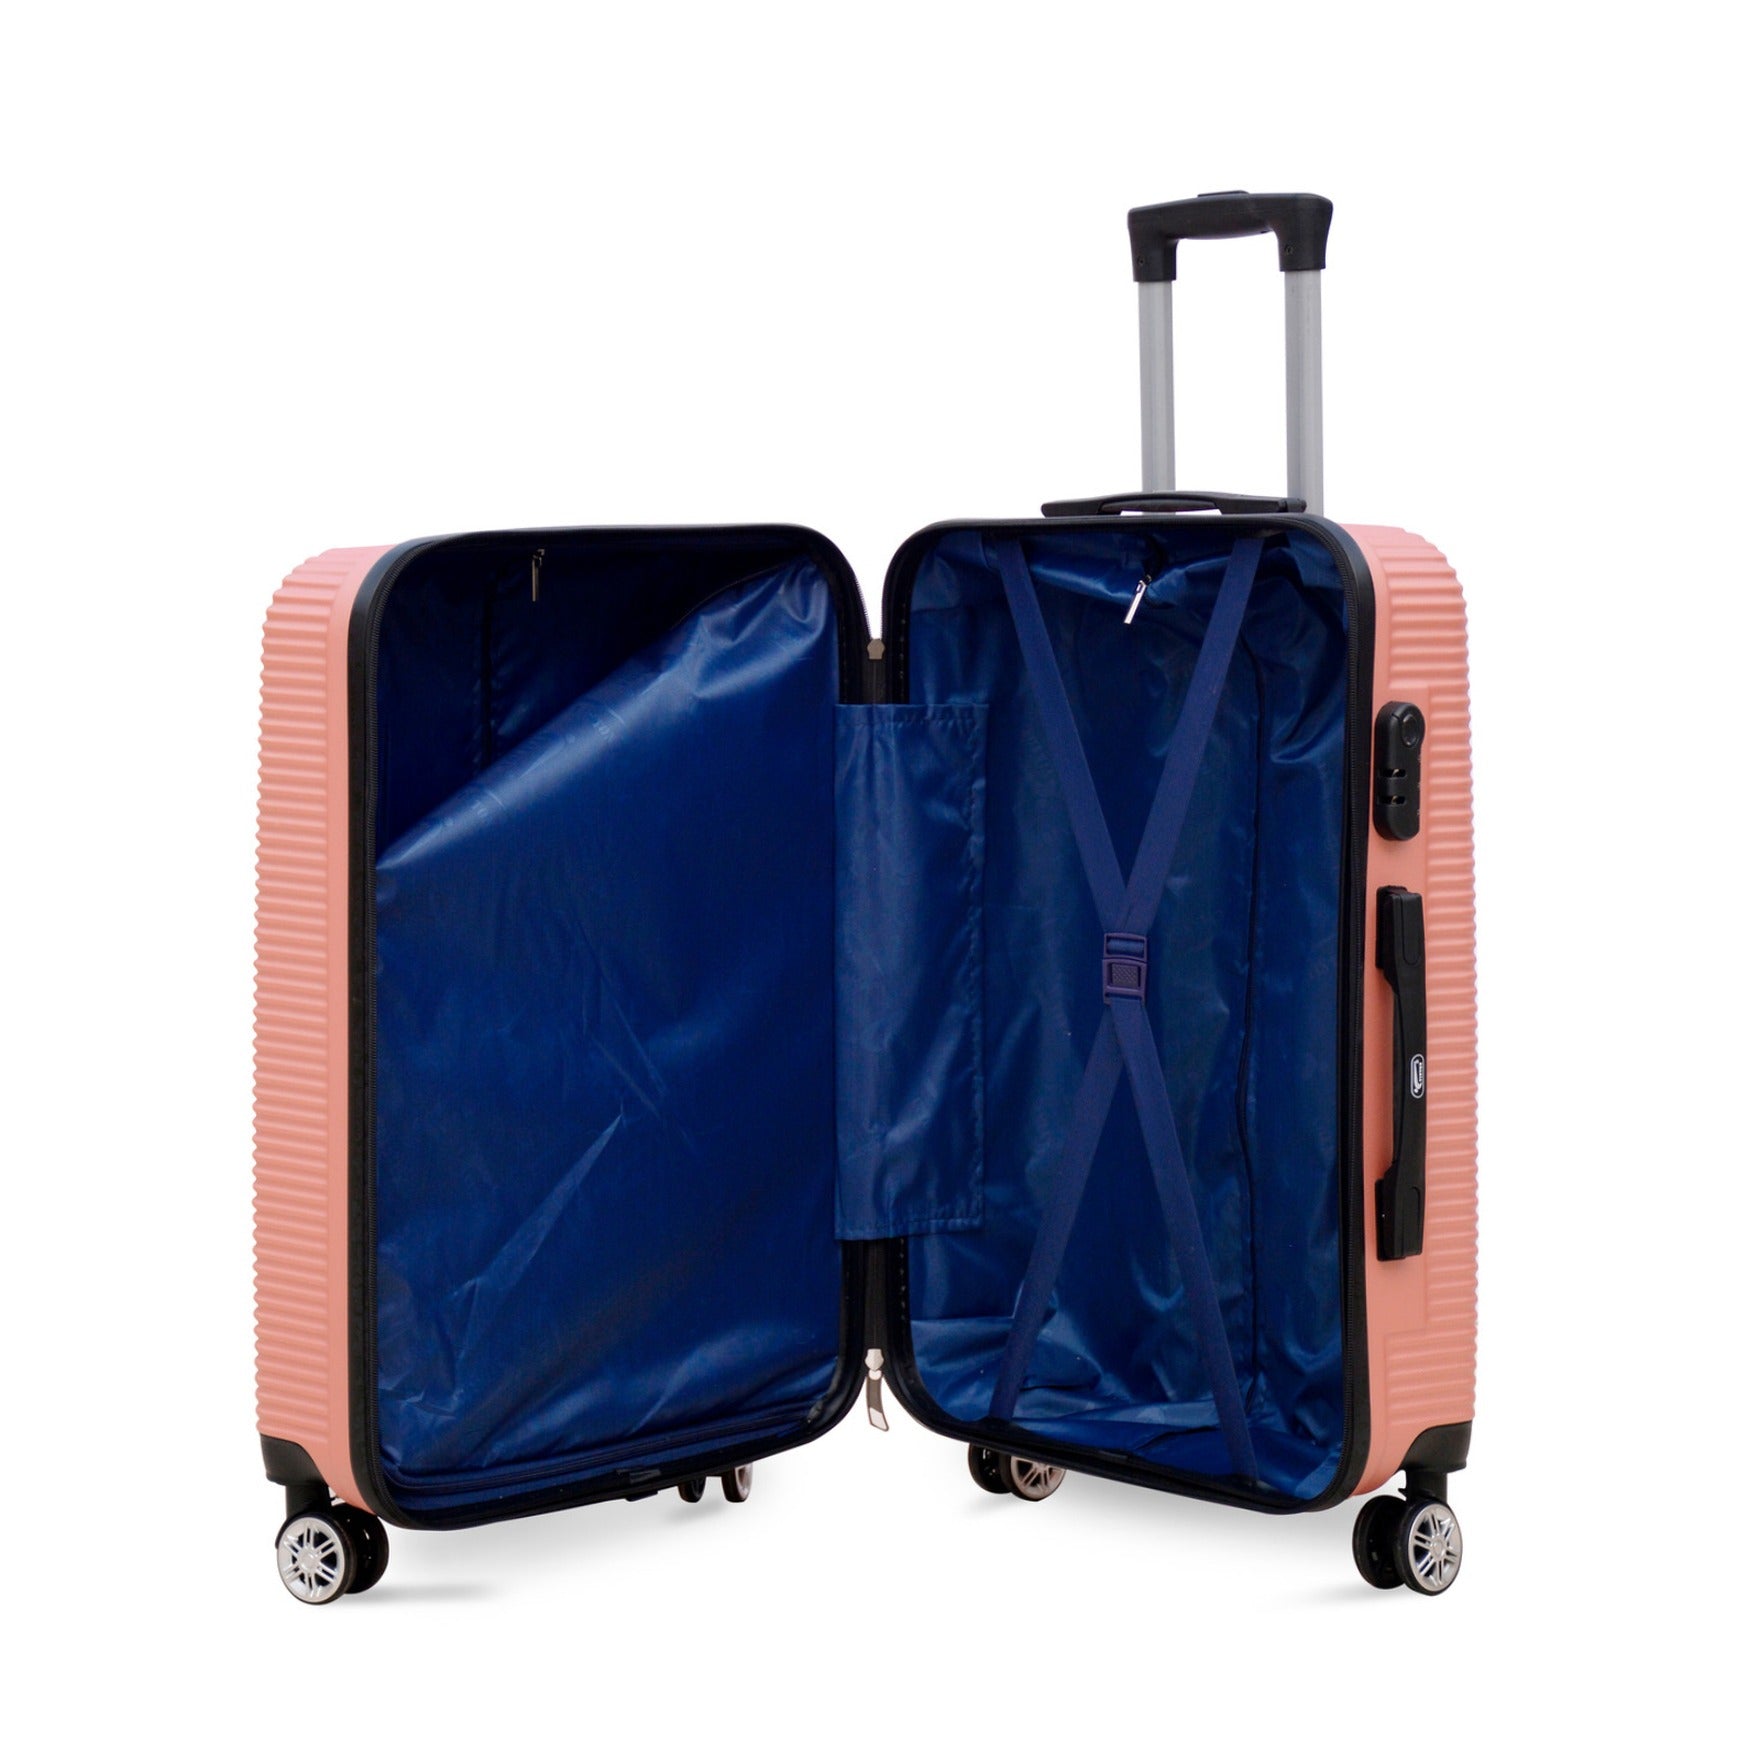 28" Dark Pink Colour JIAN ABS Line Luggage Lightweight Hard Case Trolley Bag With Spinner Wheel Zaappy.com